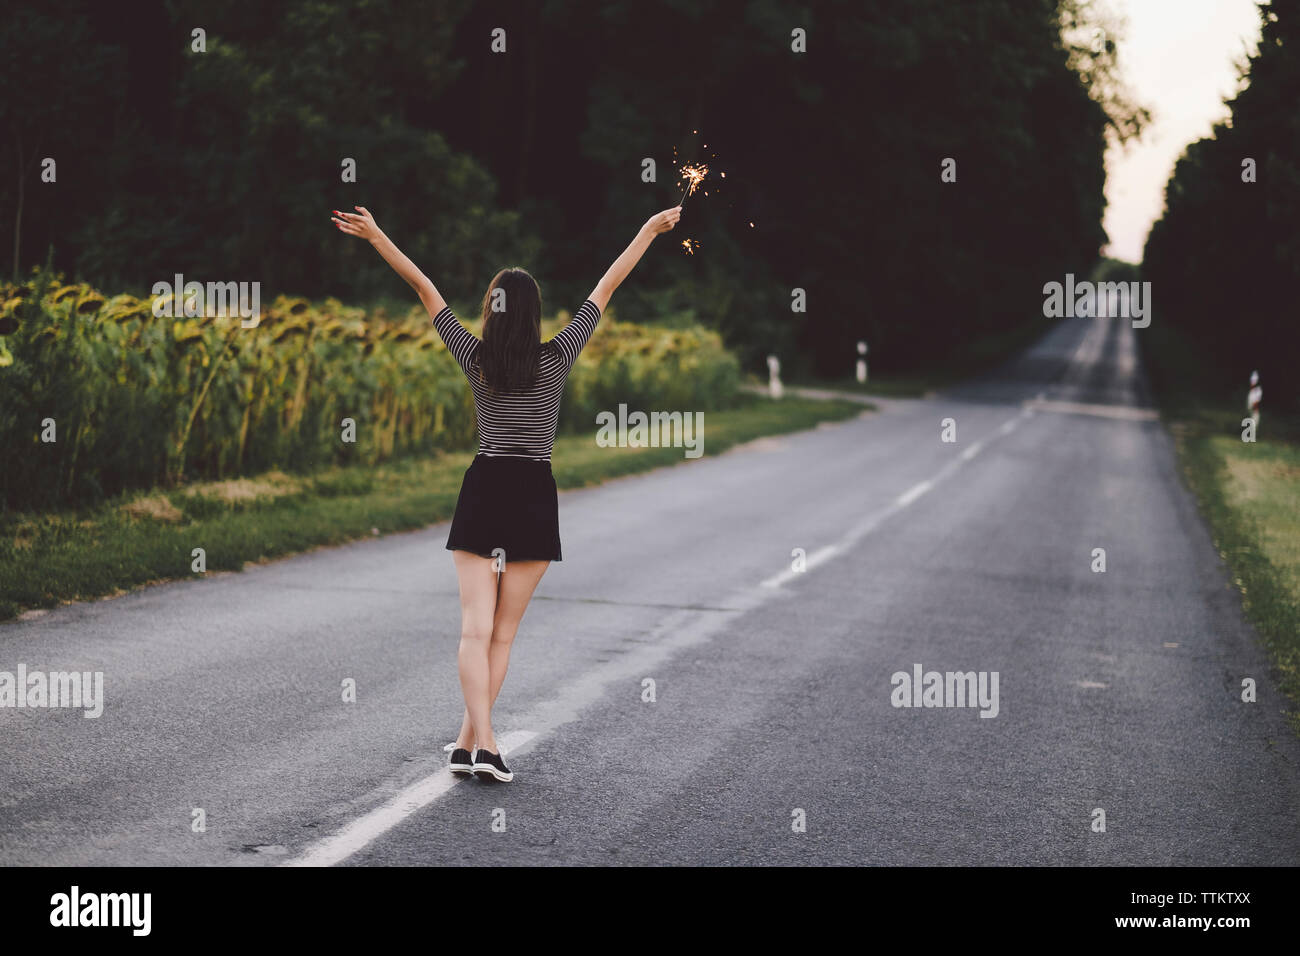 Rear view of woman with arms raised holding sparkler while standing on road Stock Photo